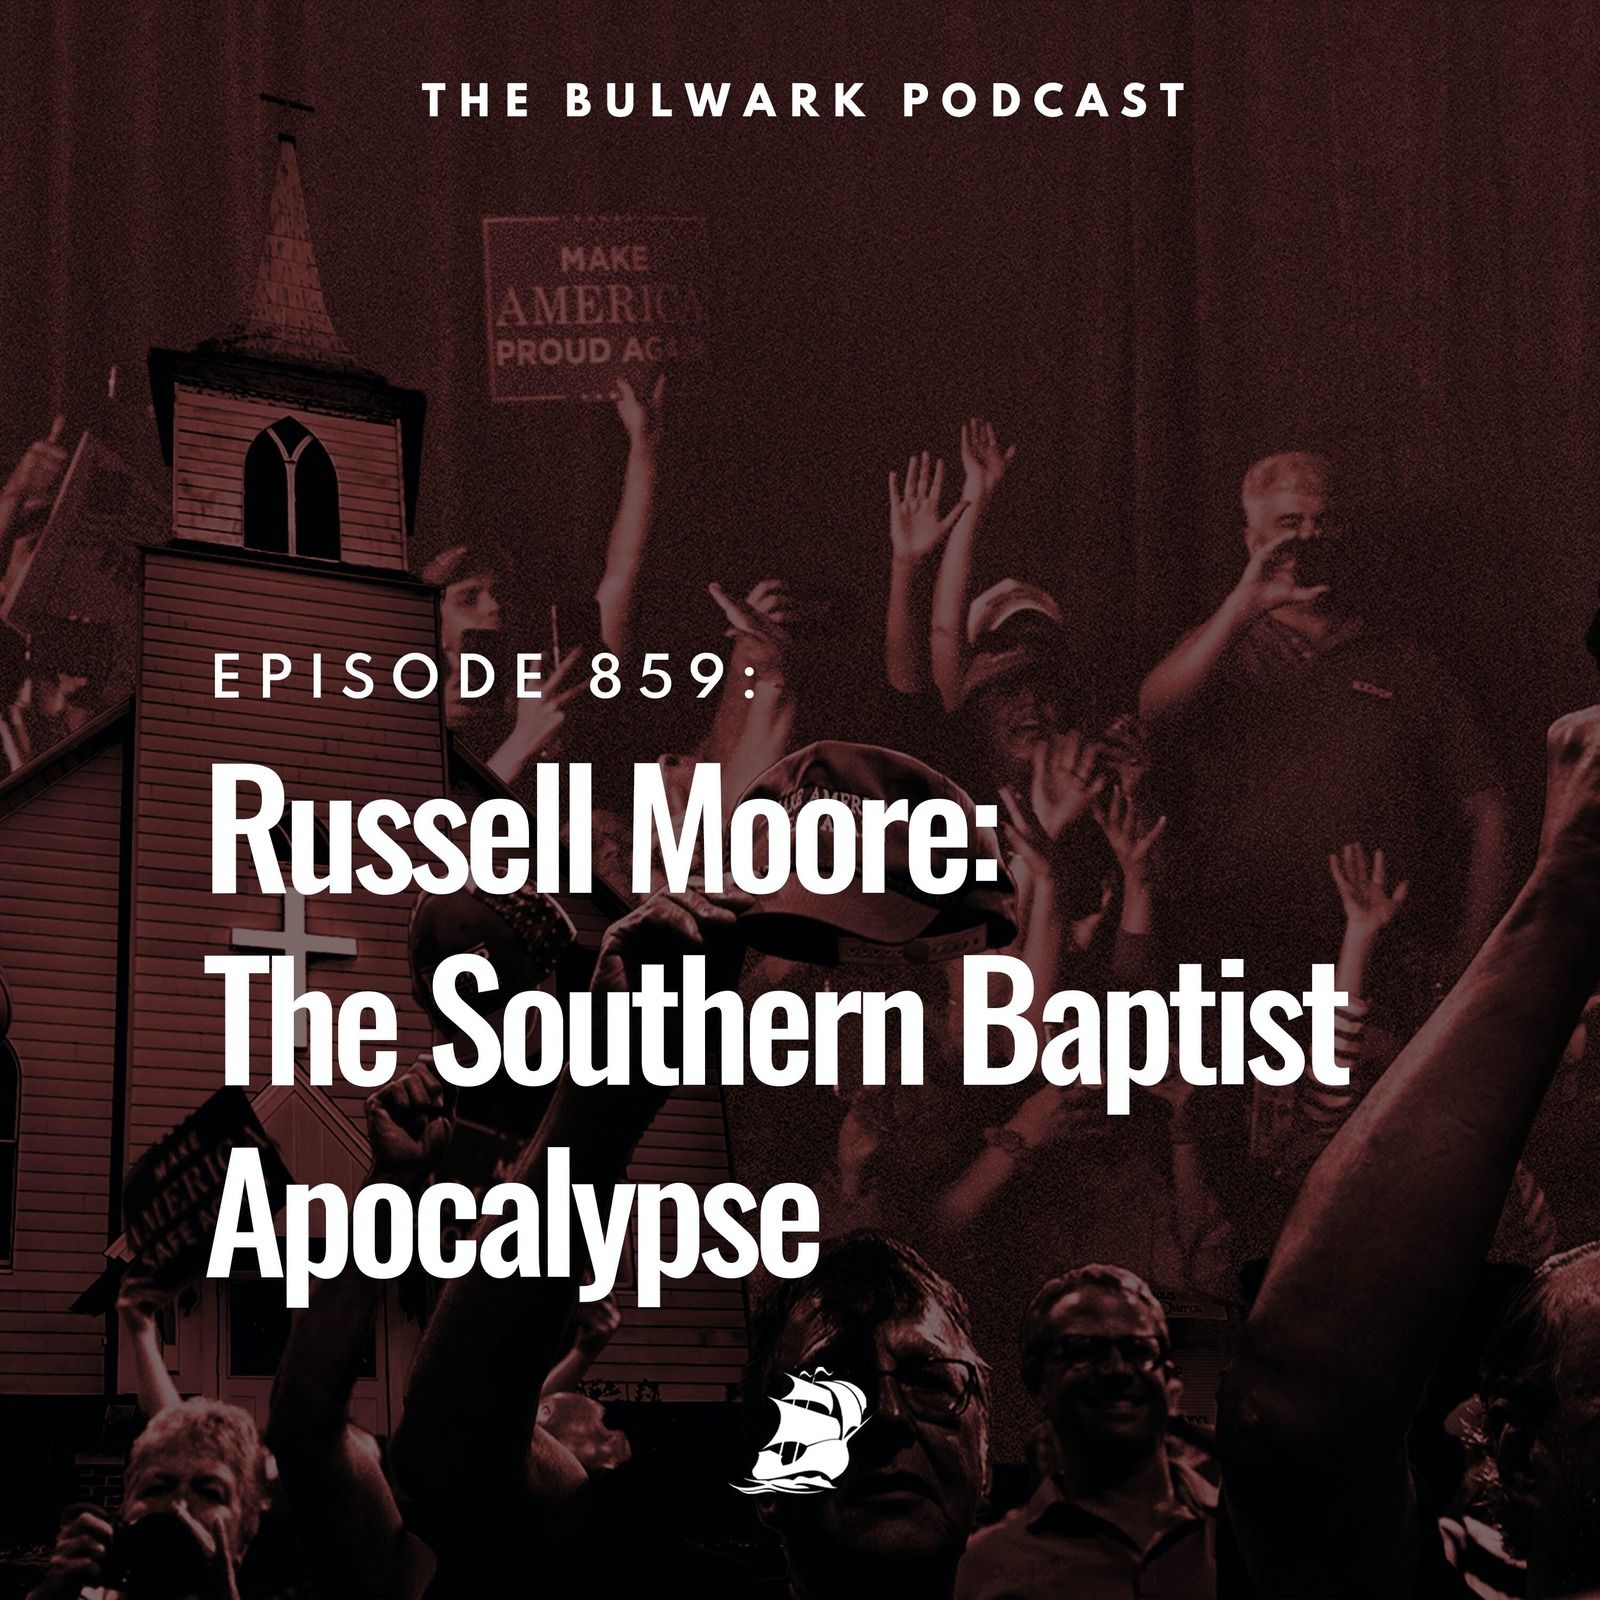 Russell Moore: The Southern Baptist Apocalypse